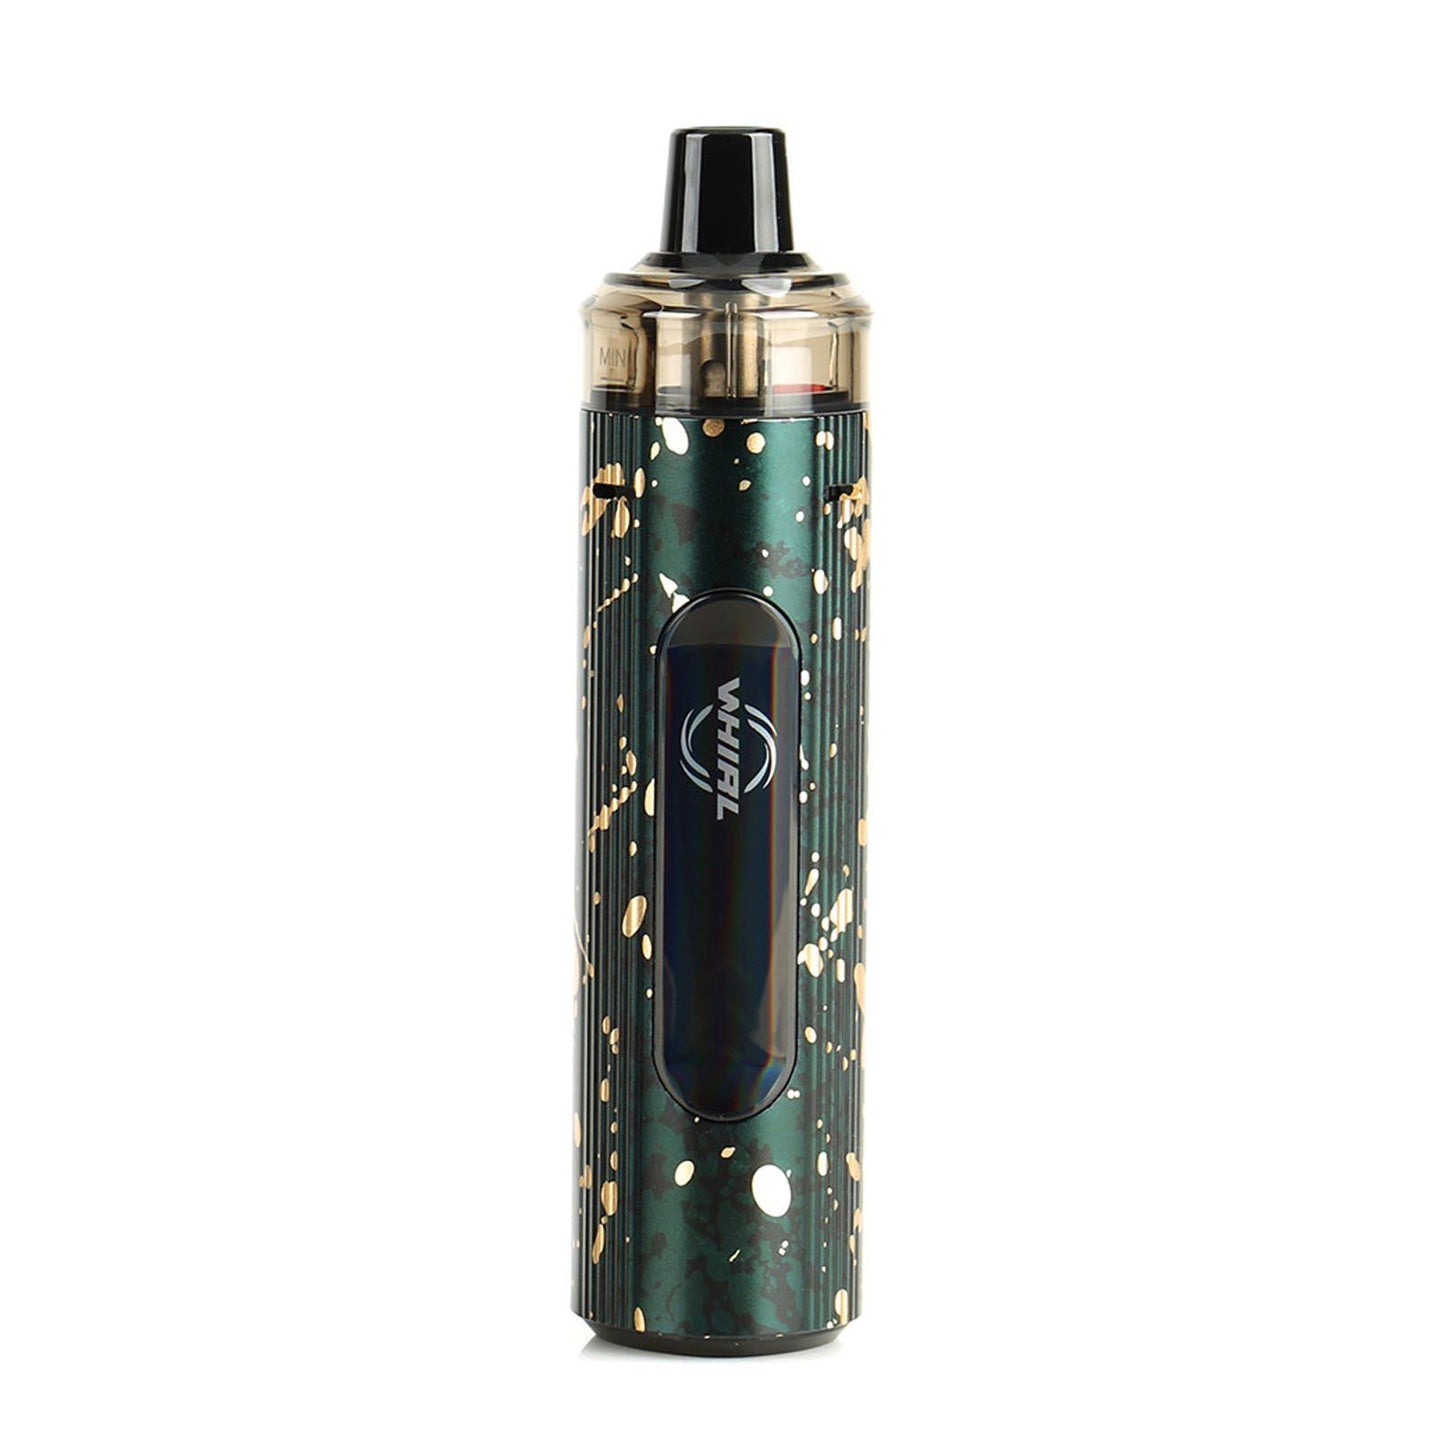 Whirl T1 Pod Mod POD SYSTEM UWELL Camouflage 